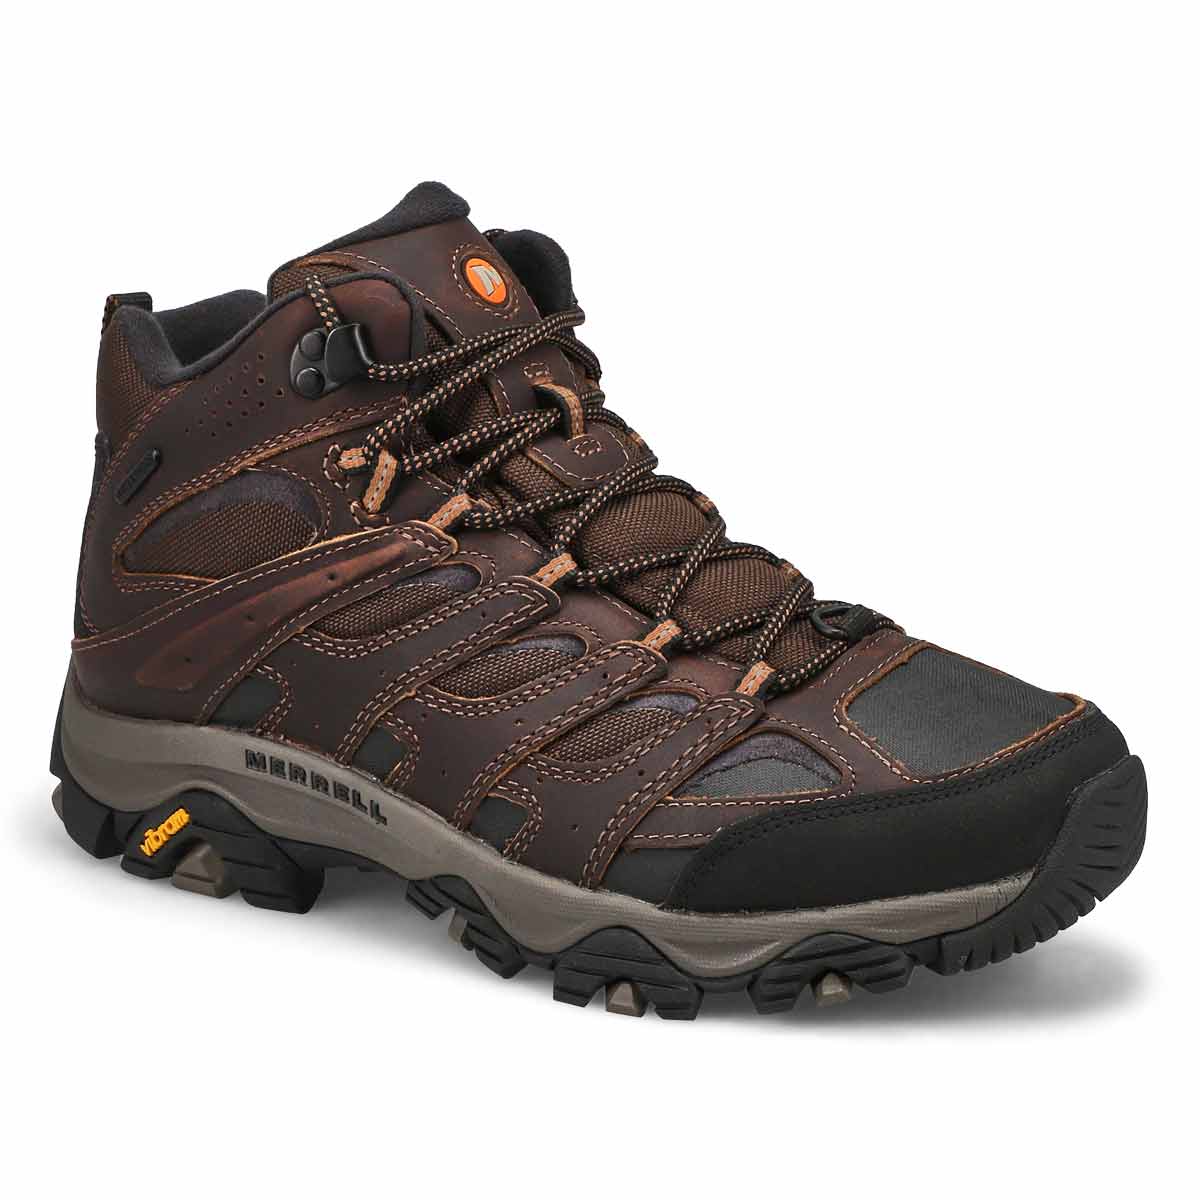 Men's Moab 3 Themo Waterproof Wide Hiking Boot - Earth